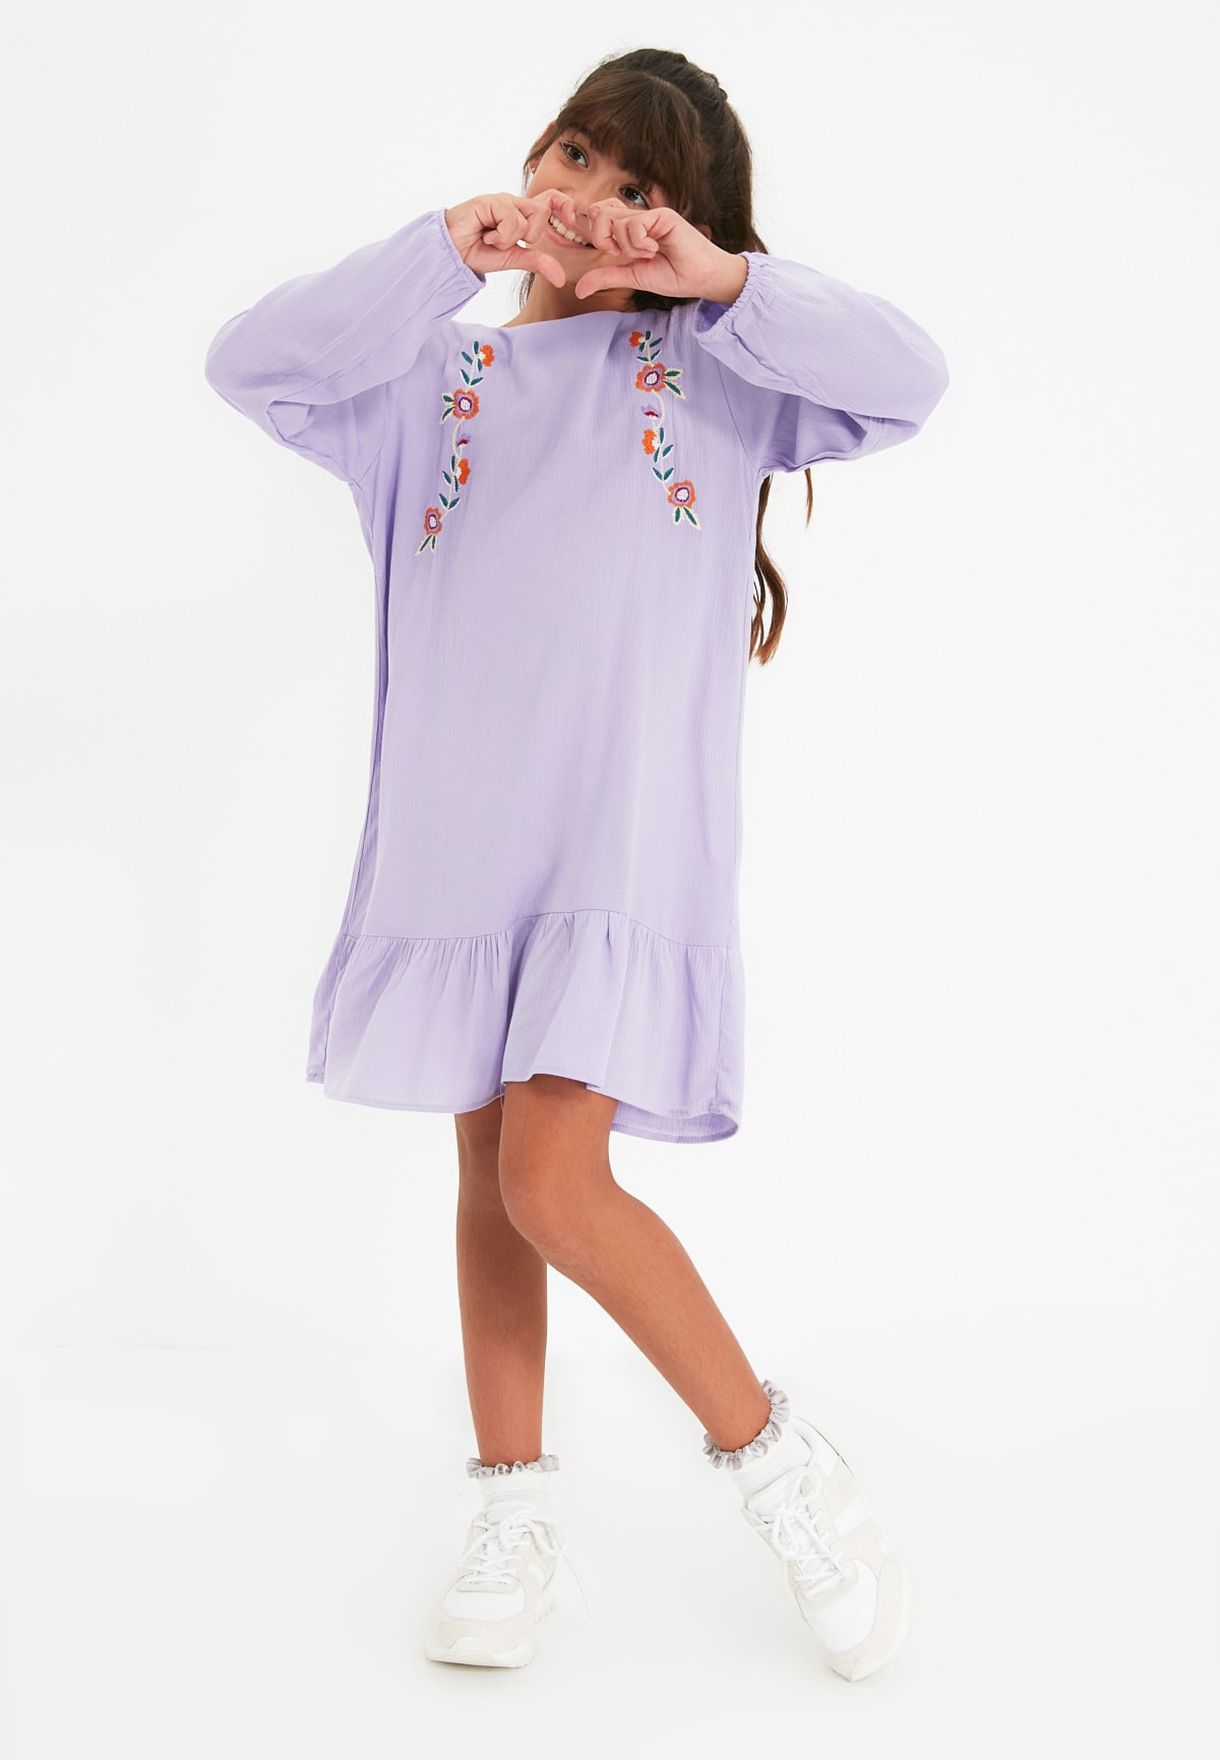 Kids Embroidered Dress